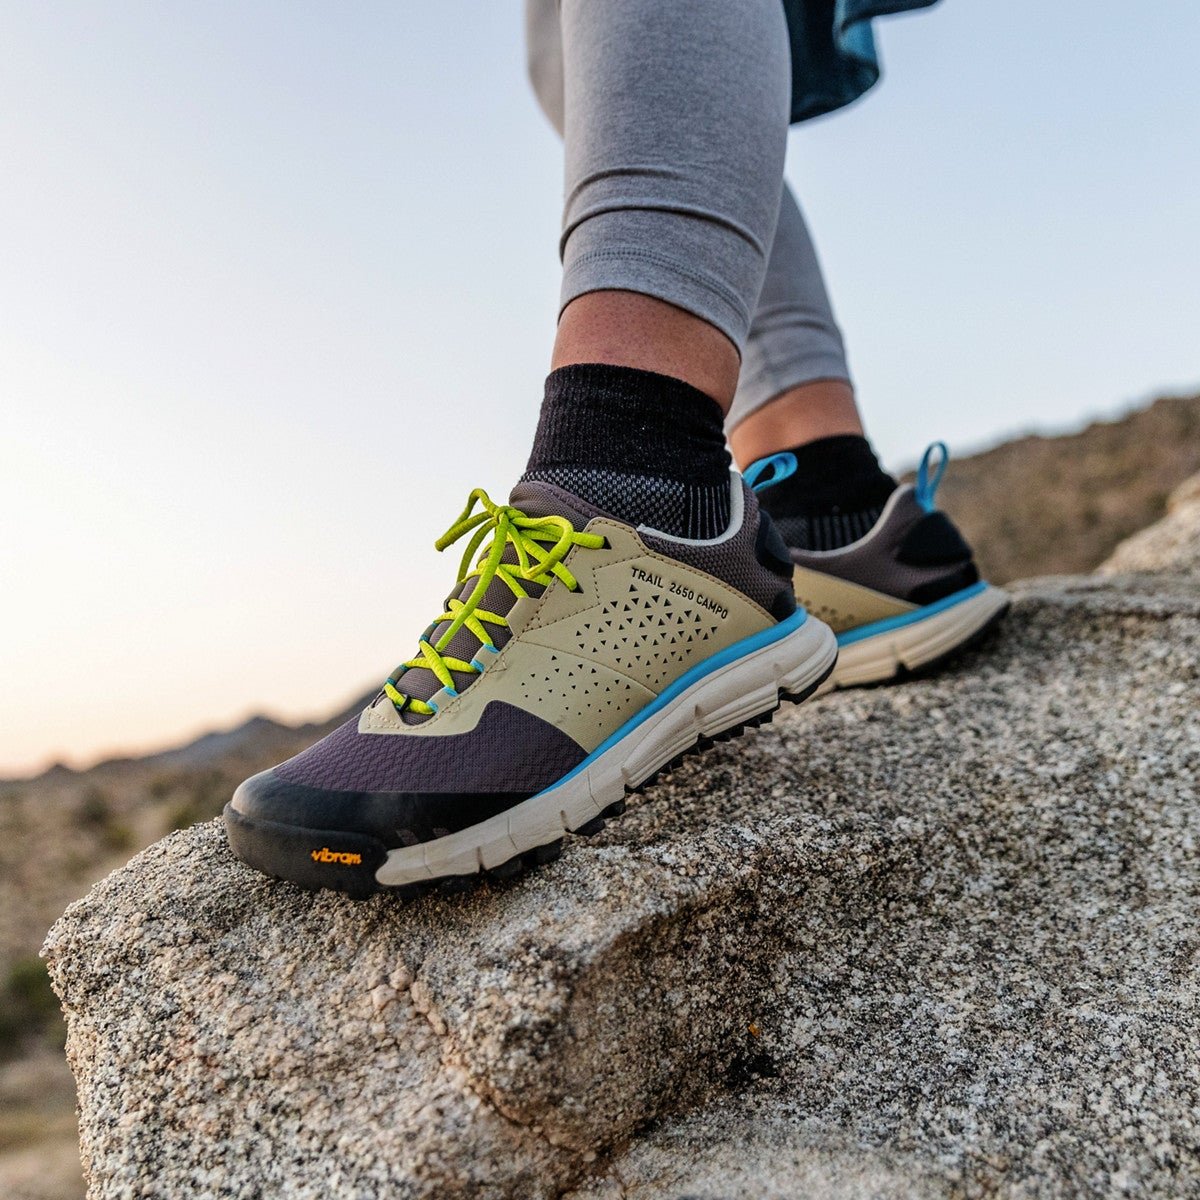 The Best Hiking Shoes of 2022